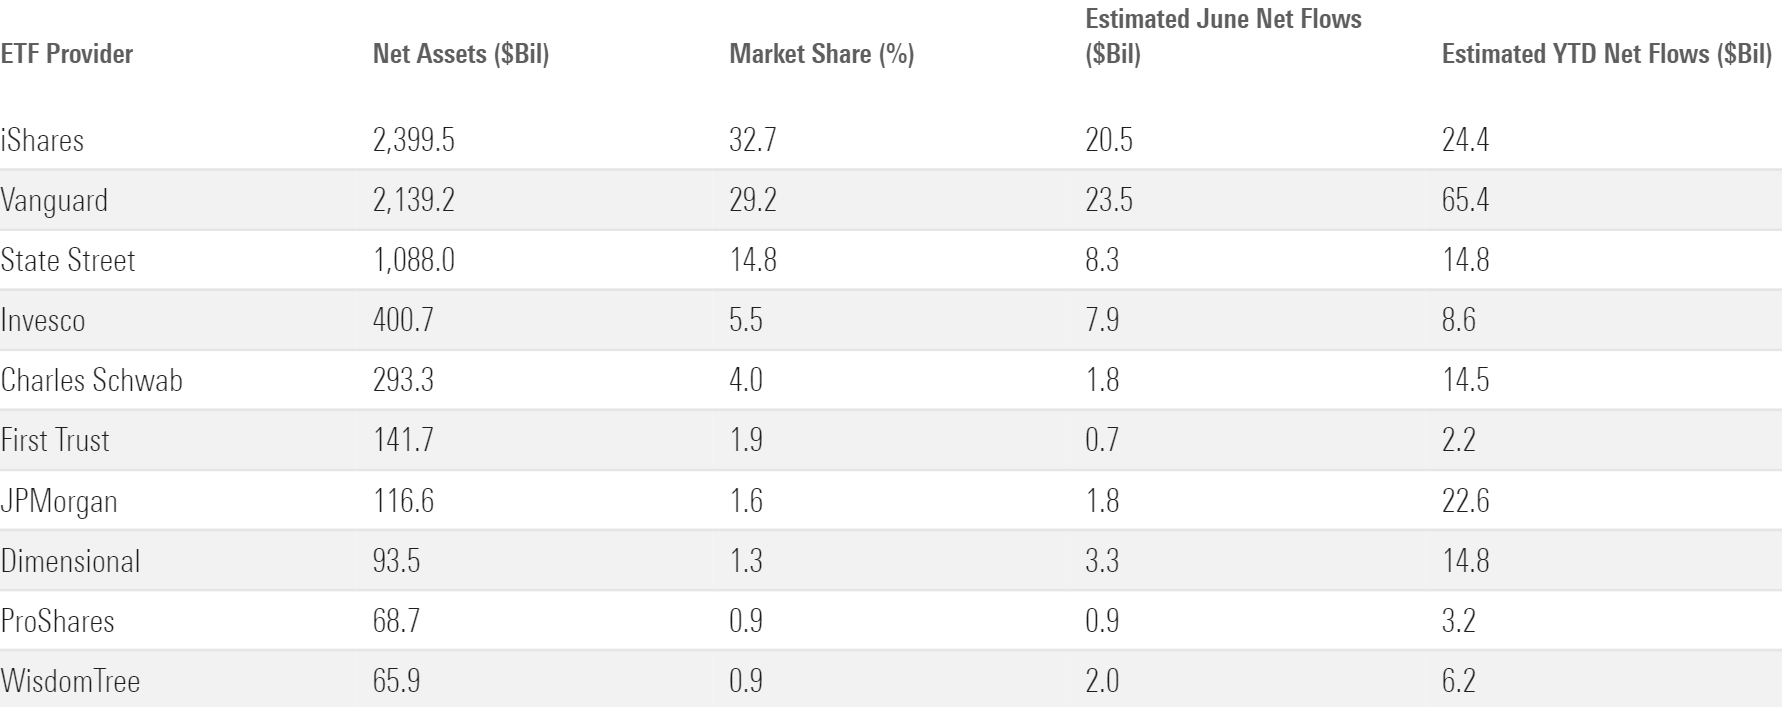 Table showing June flows for the largest ETF providers